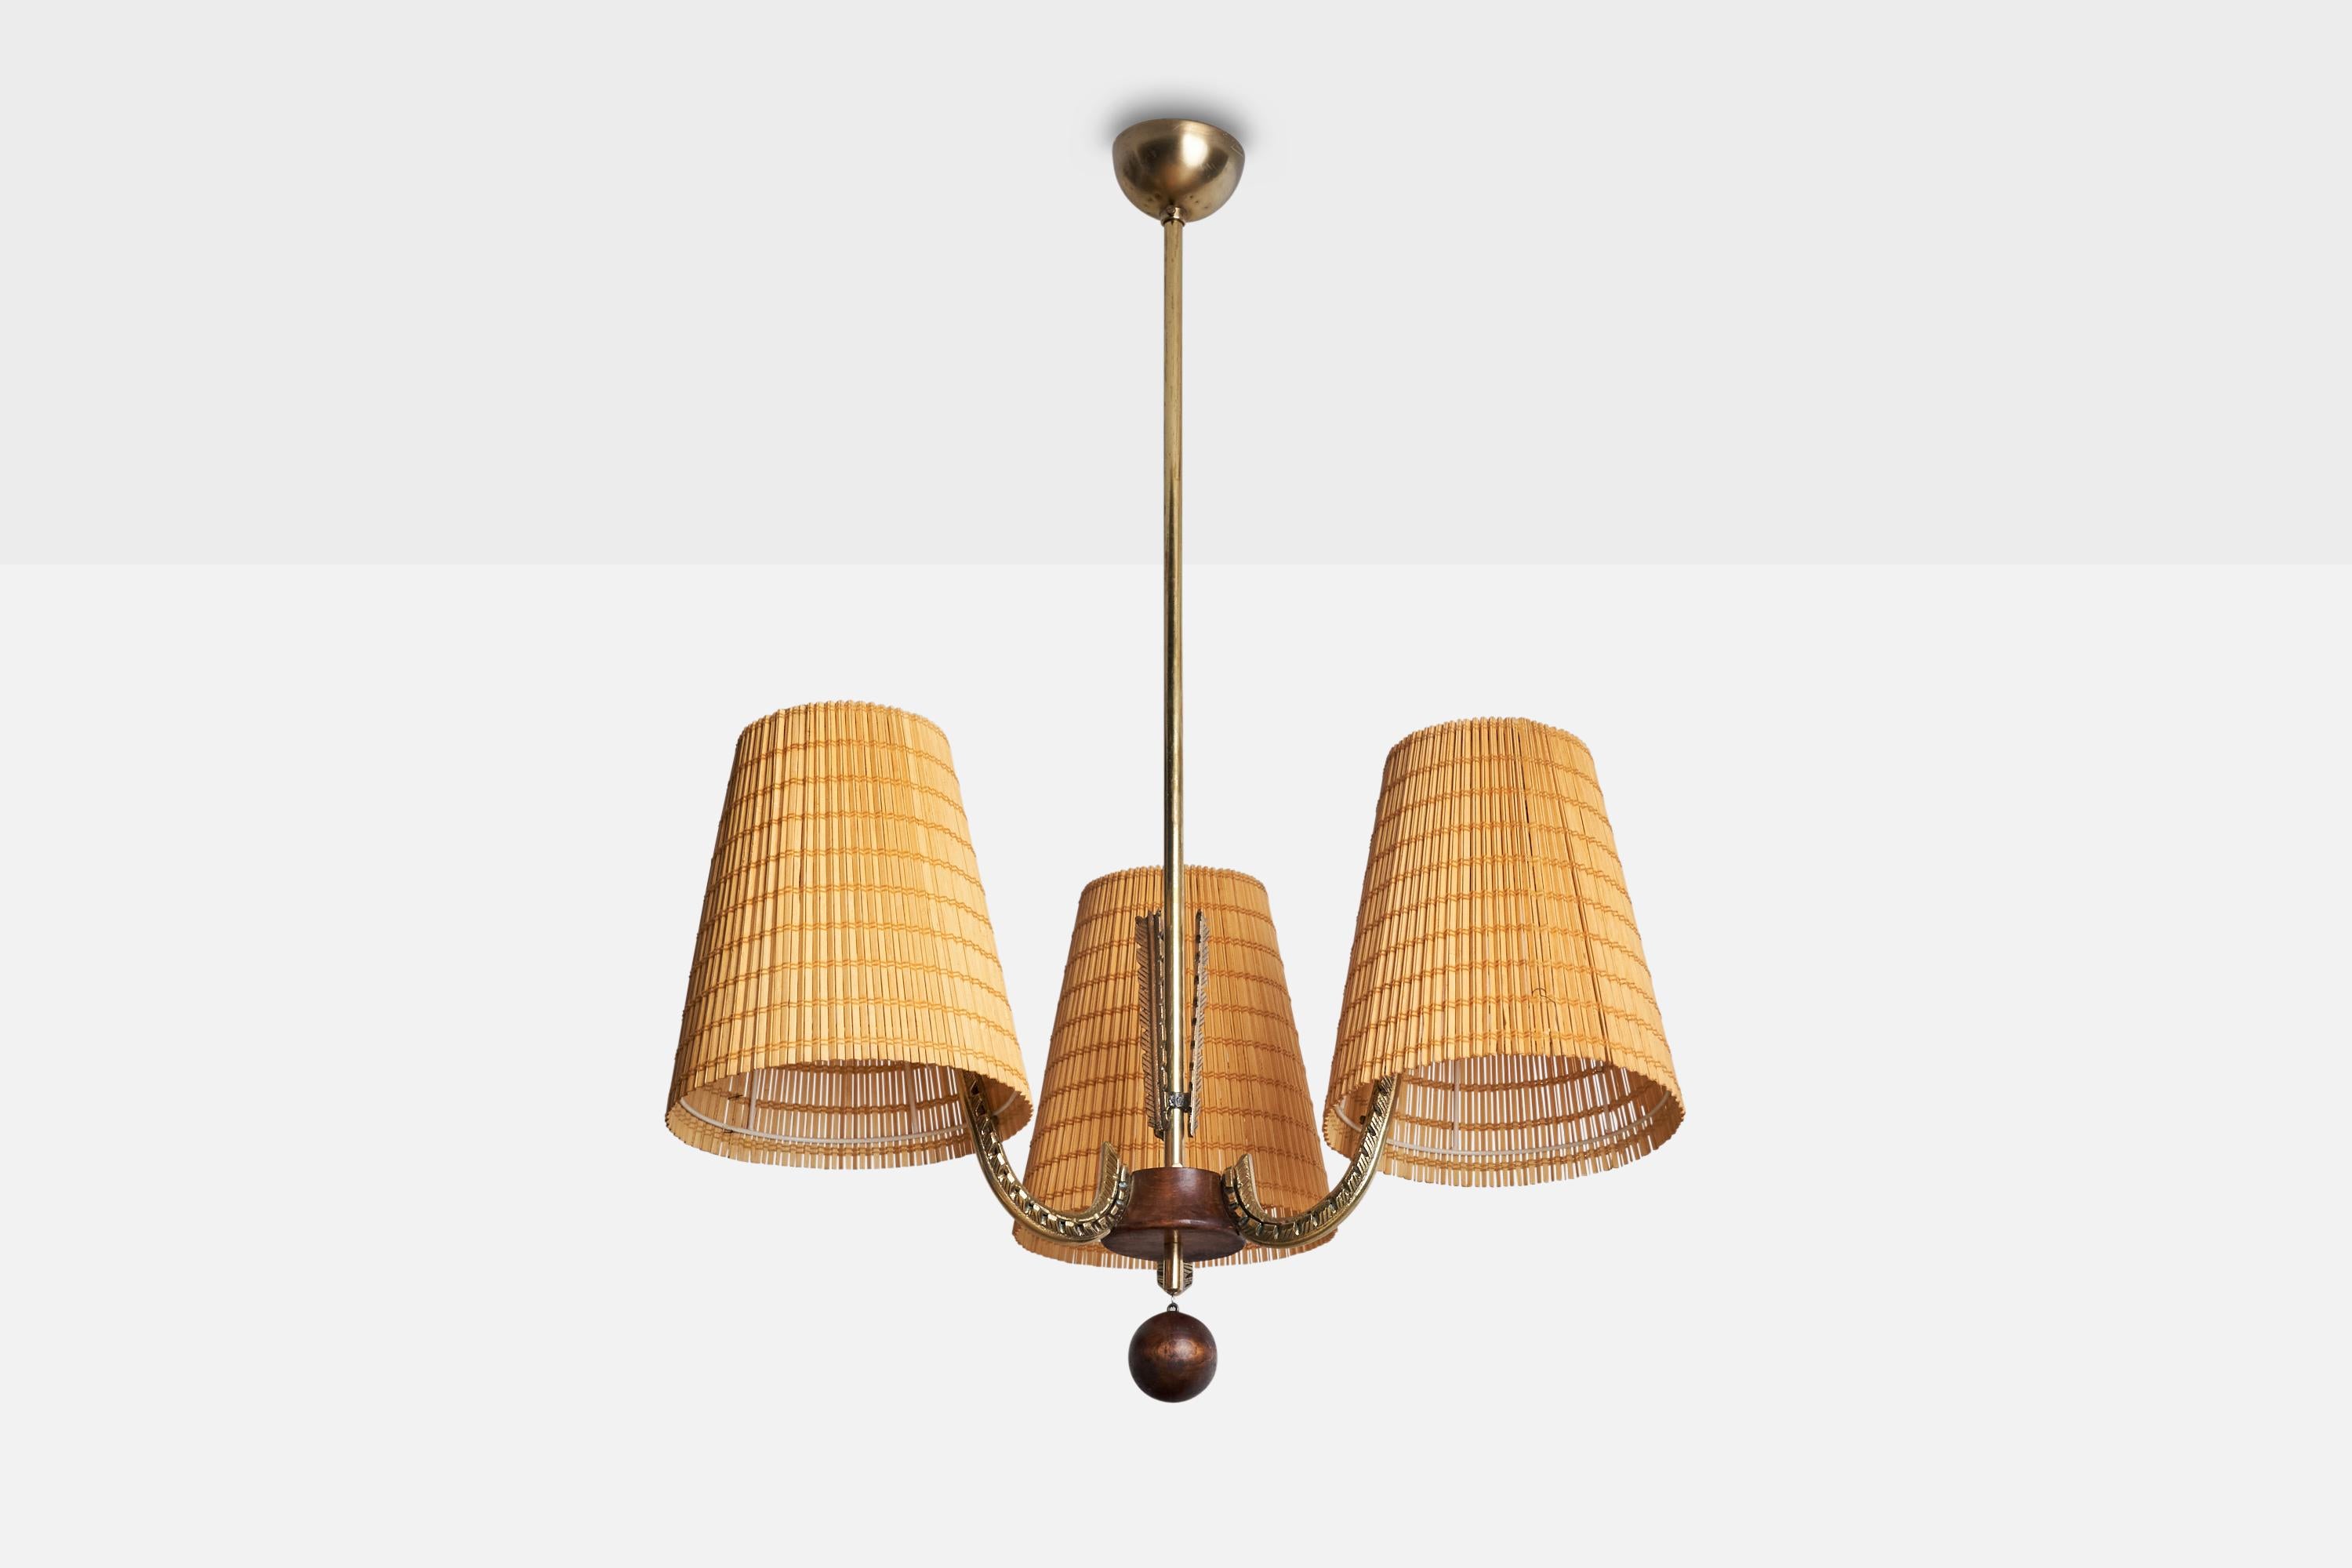 A brass, stained birch and woven reed chandelier designed and produced by Ornö, Finland, 1930s.

Dimensions of canopy (inches): 2” H x 3.5” Diameter
Socket takes standard E-26 bulbs. 3 sockets.There is no maximum wattage stated on the fixture. All